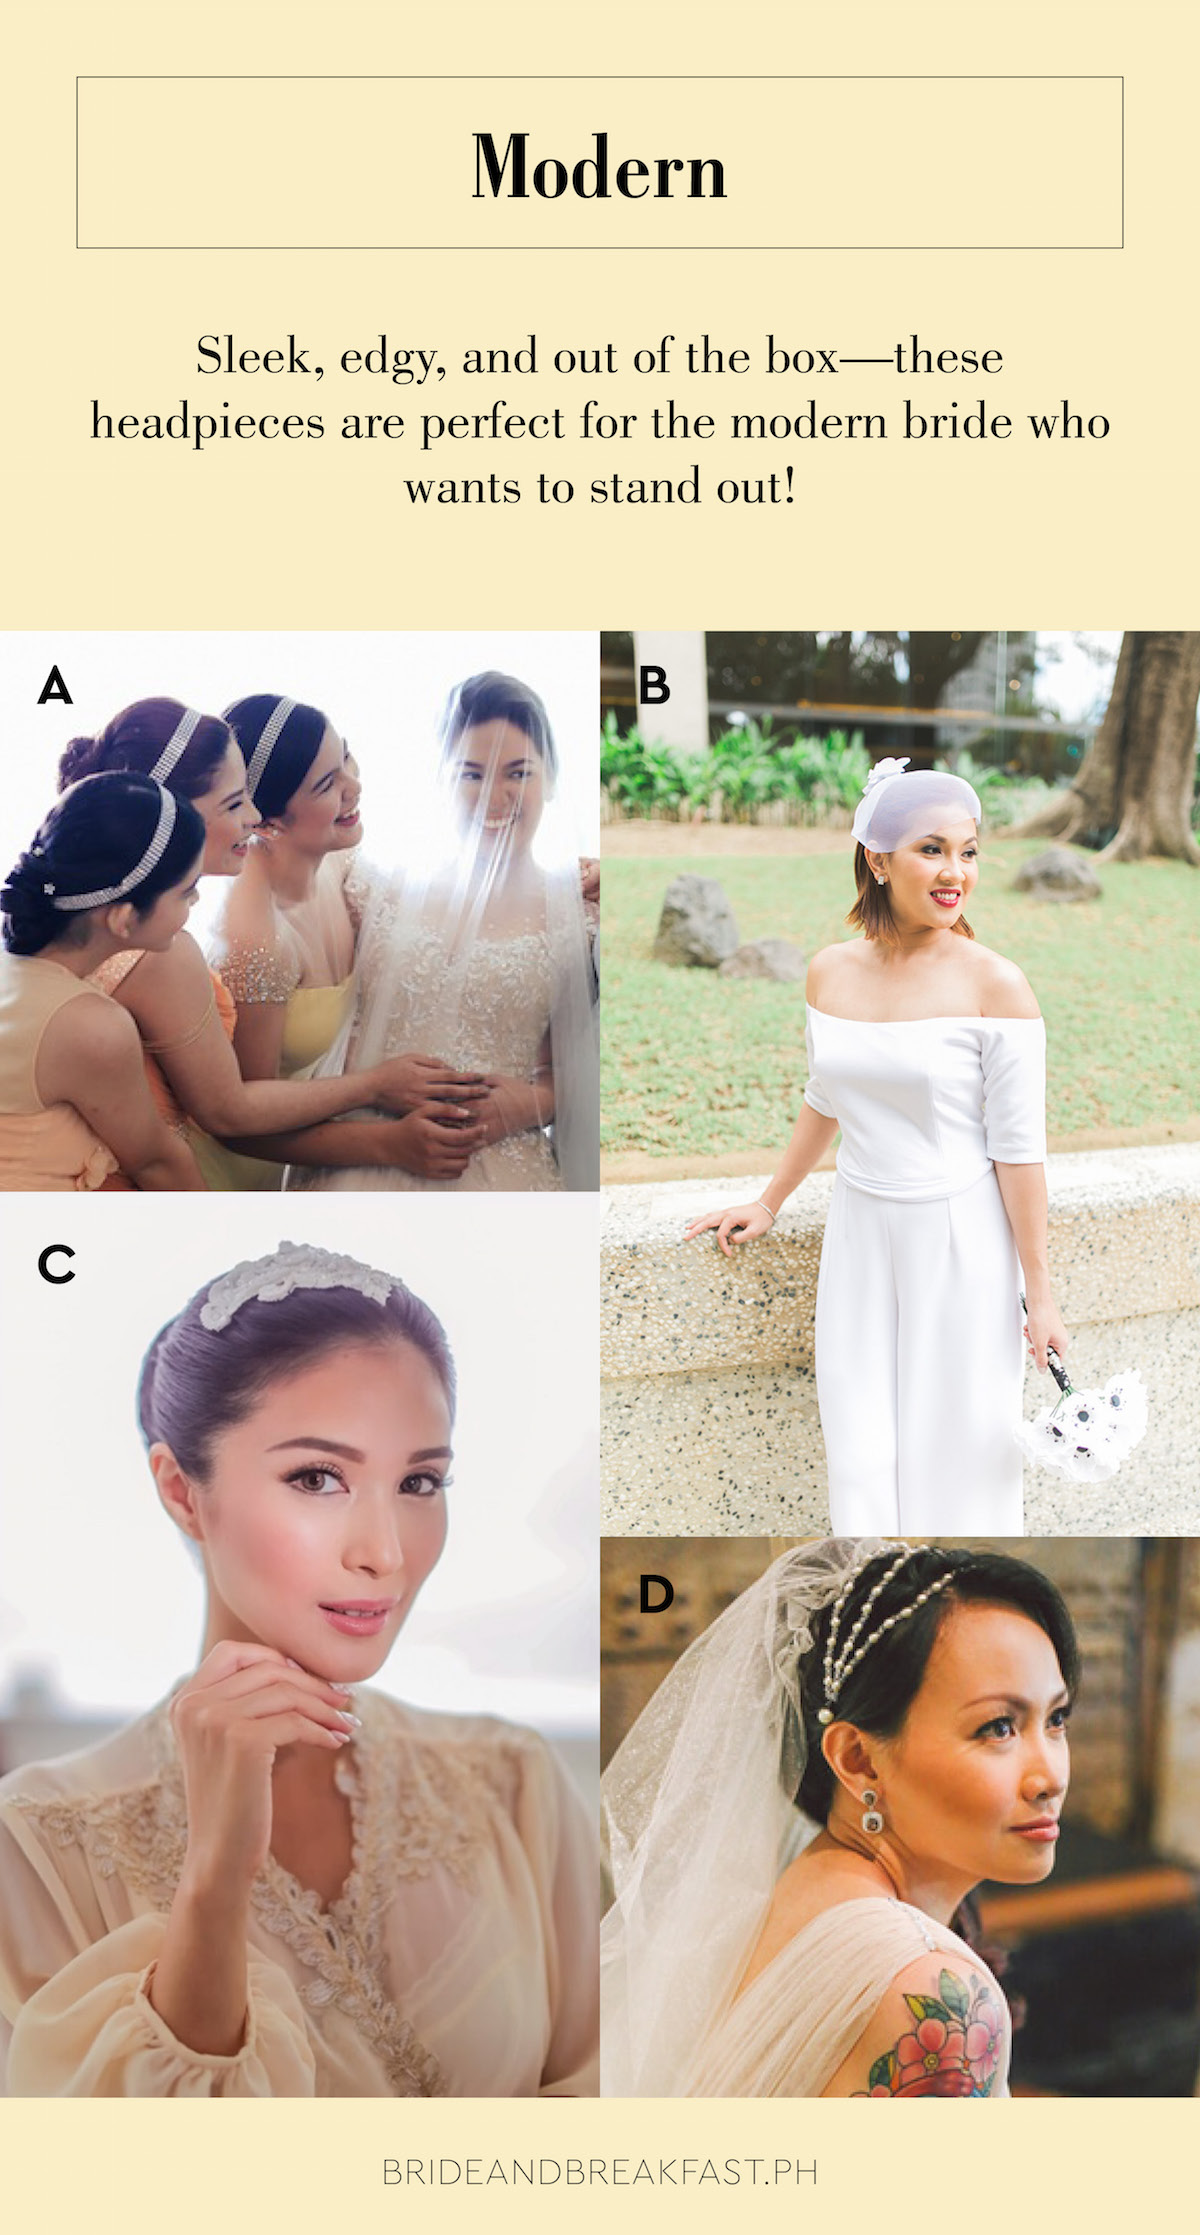 Modern Sleek, edgy, and out of the box--these headpieces are perfect for the modern bride who wants to stand out!